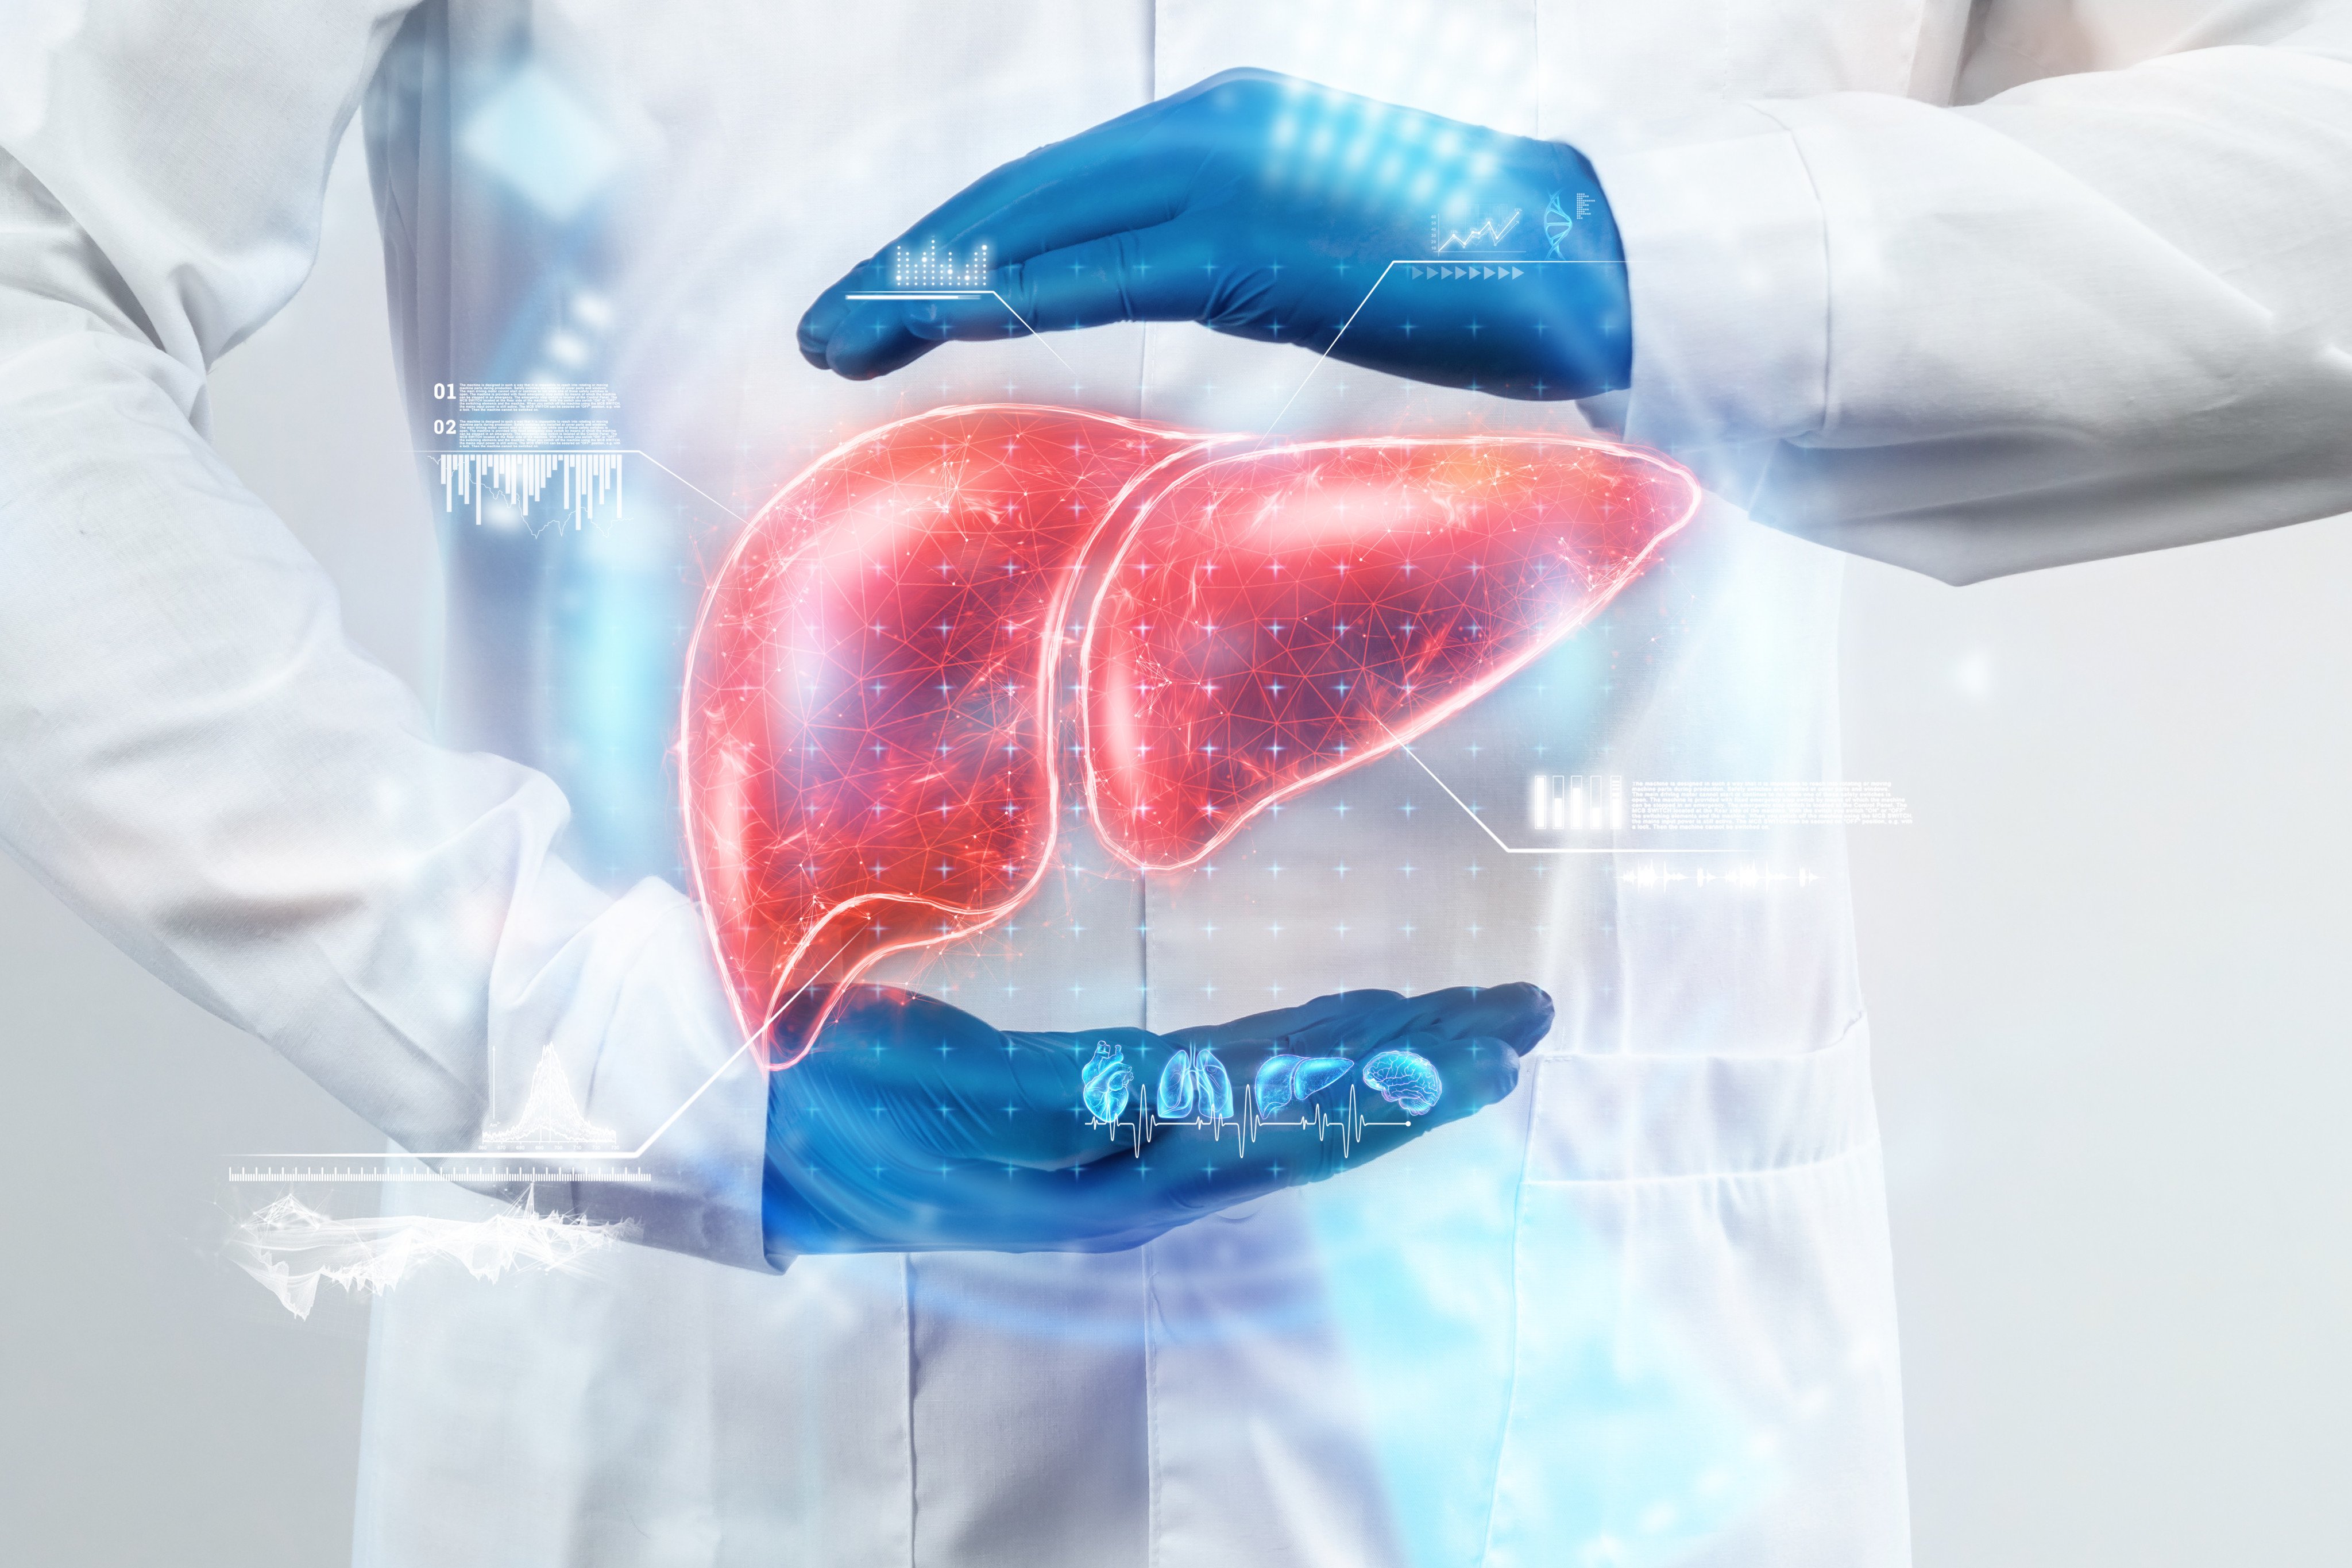 The University of Hong Kong has done a study on a new treatment plan for liver cancer patients. Photo: Shutterstock